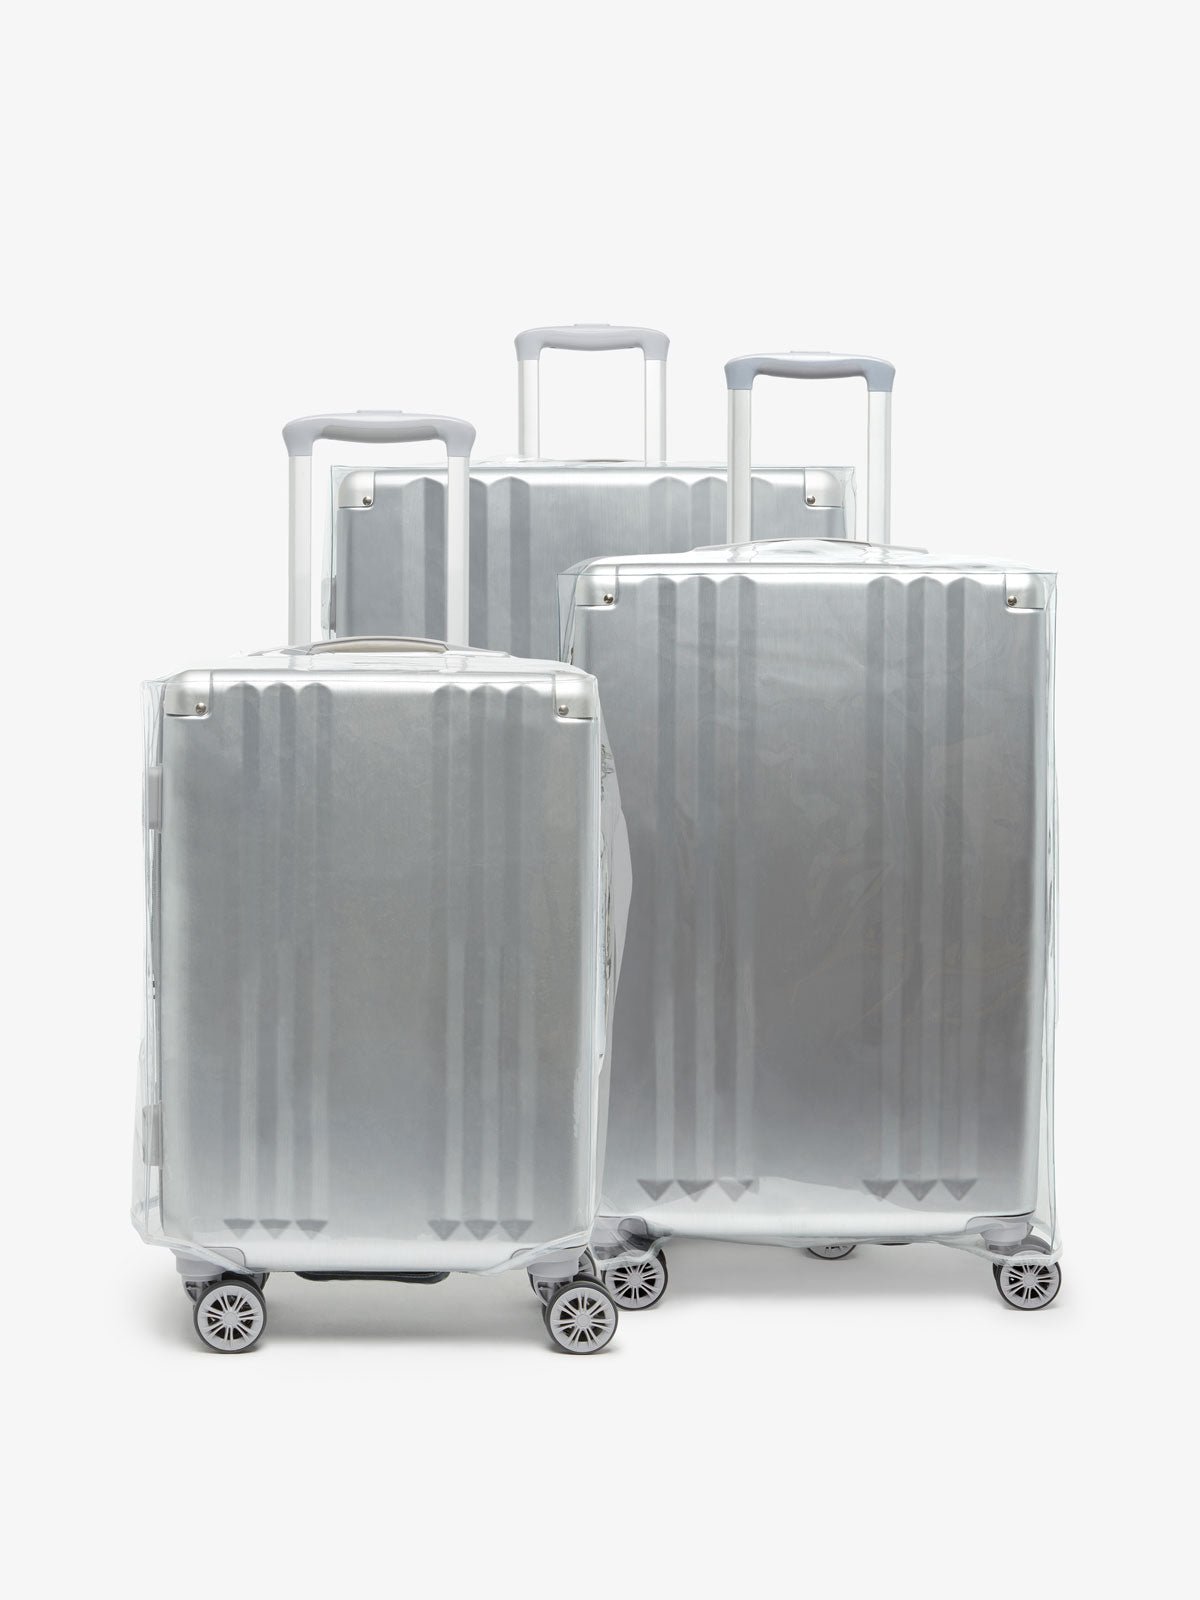 Plastic clear simple luggage cover with velcro closure at bottom for CALPAK 3-piece luggage sets